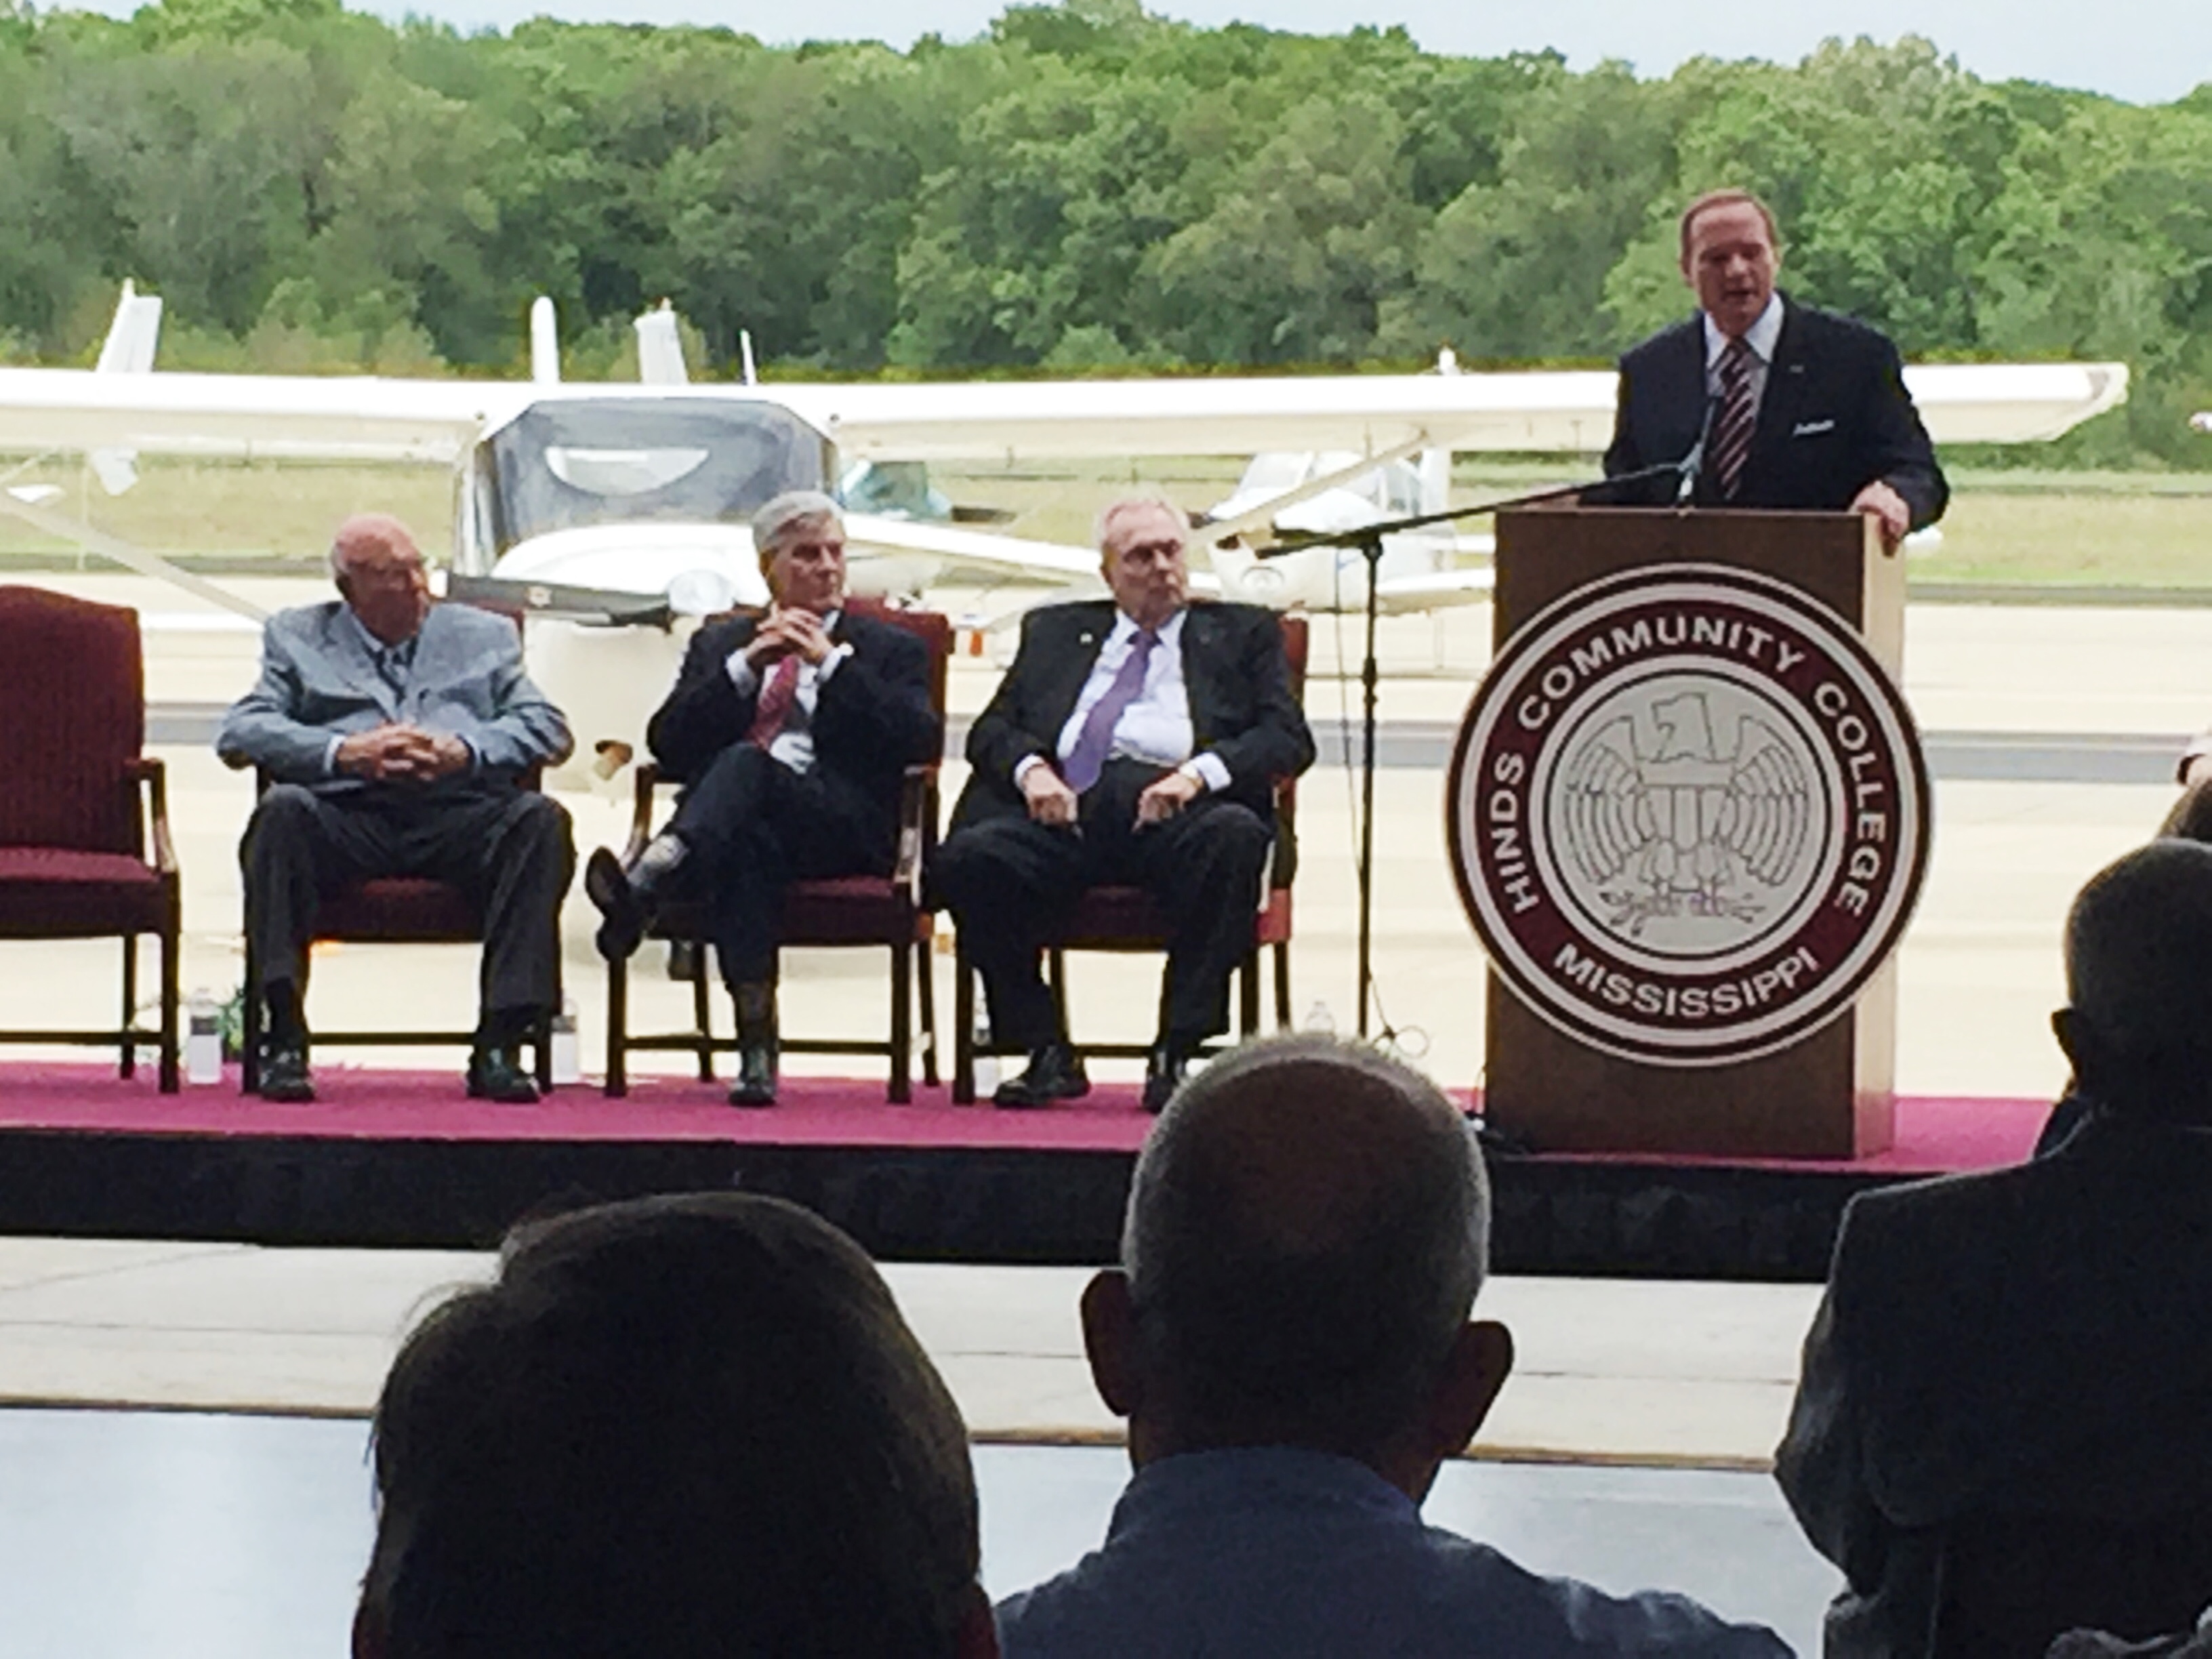 MSU President Mark E. Keenum addresses the crowd at the announcement of the 2 Plus 2 precision agriculture partnership  with Hinds Community College established today [April 9]. Others on the podium applauding the alliance are, from left, Ted Kendall III, longtime HCC Board of Trustees member and owner of Gaddis Farms in Bolton; Governor Phil Bryant; and HCC President Clyde Muse.